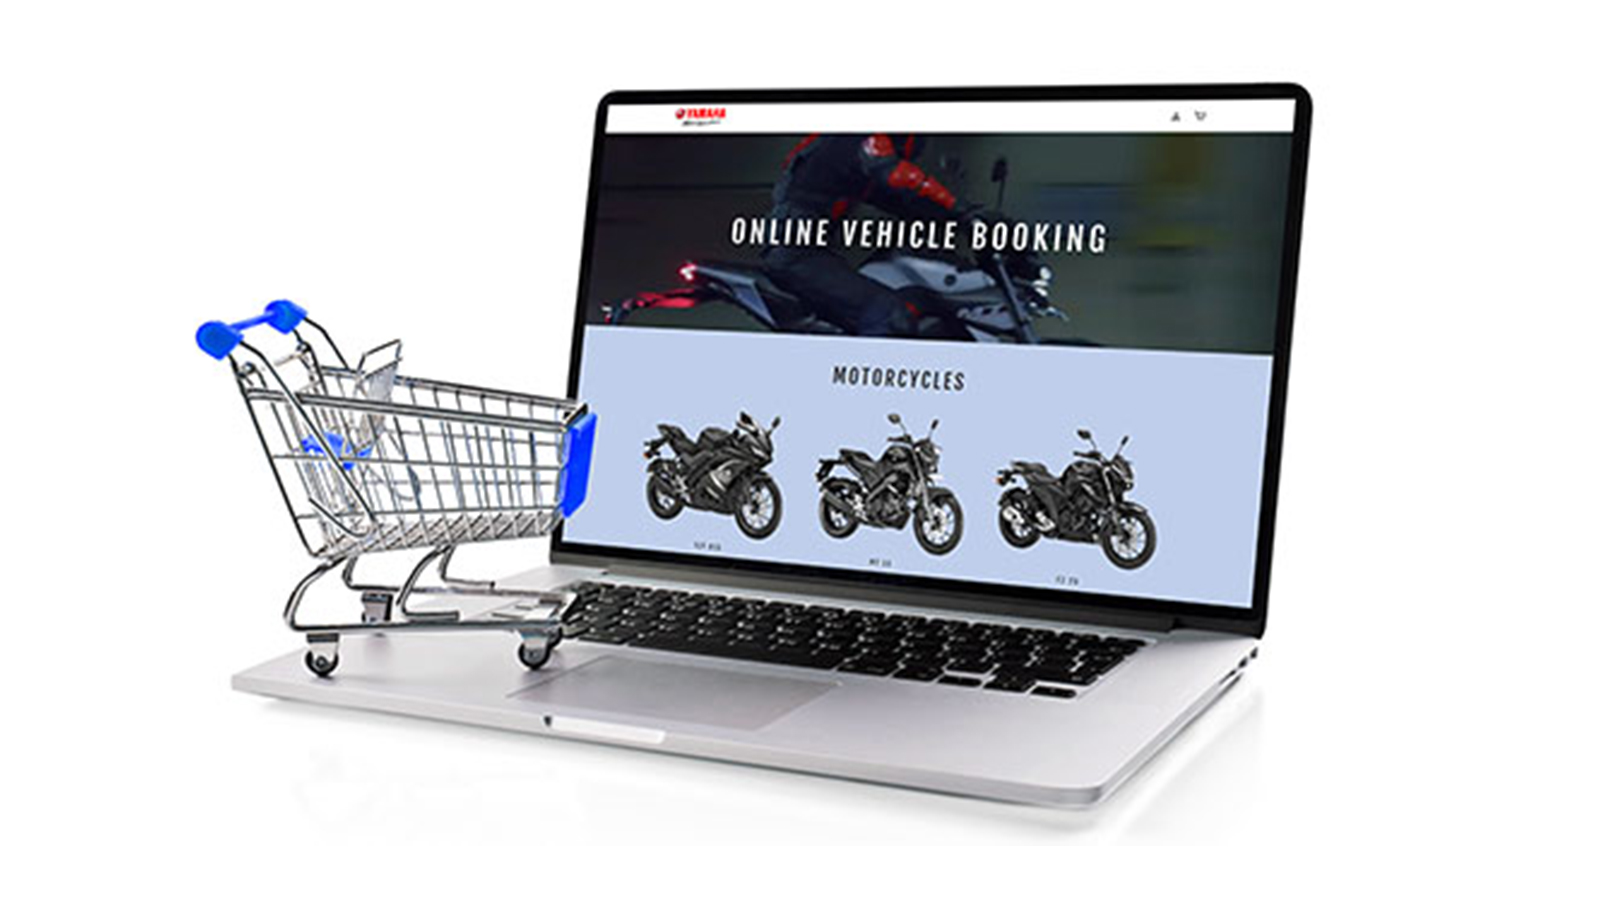 Yamaha launches Online Sales through New Website with VIRTUAL STORE
